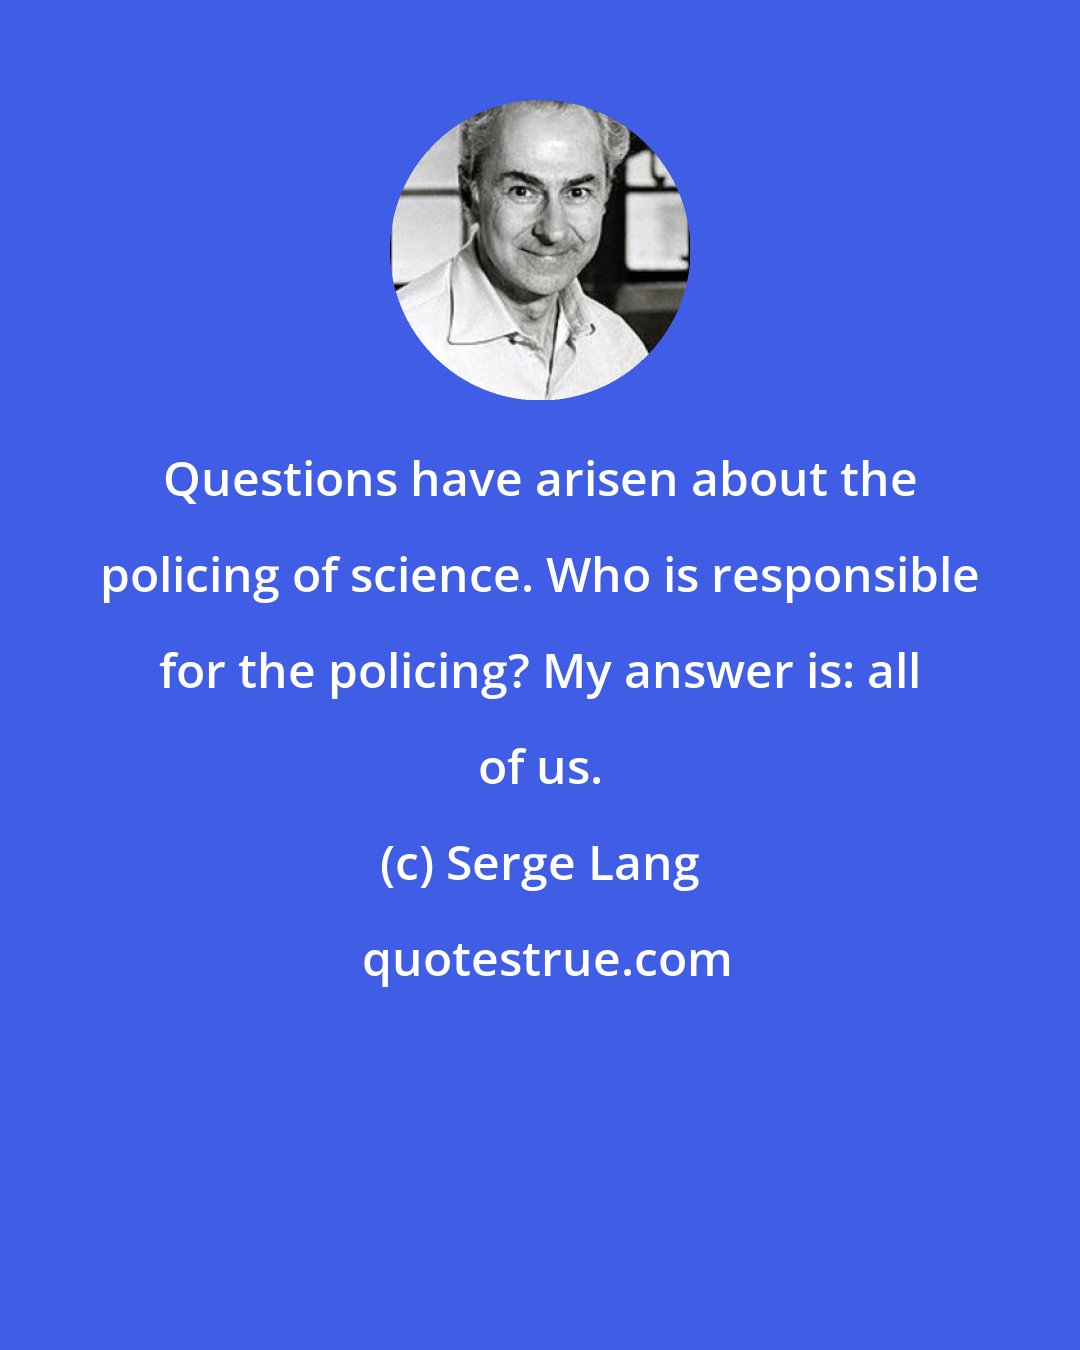 Serge Lang: Questions have arisen about the policing of science. Who is responsible for the policing? My answer is: all of us.